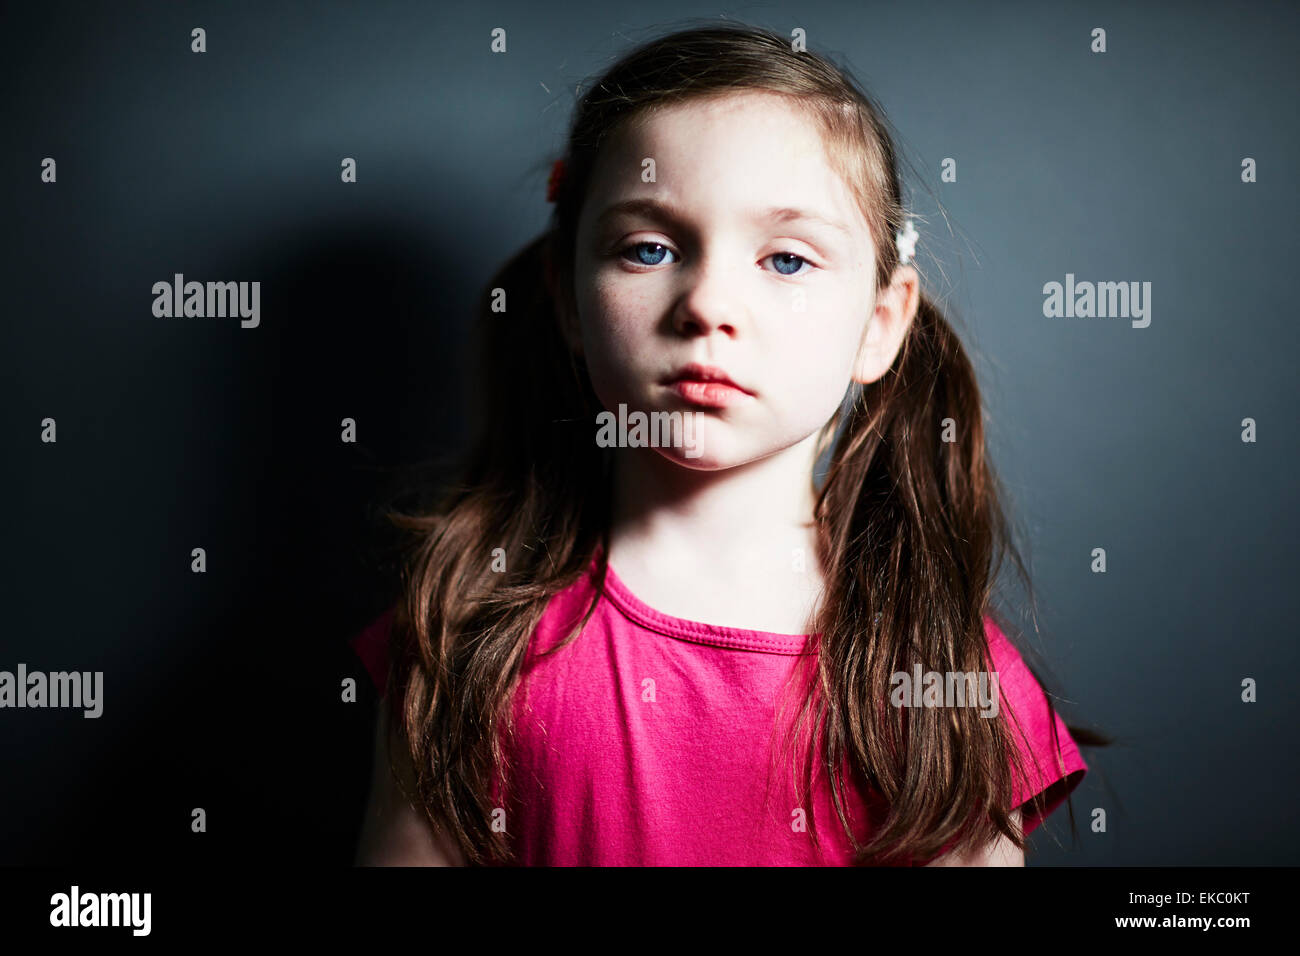 Girl with pigtails Stock Photo